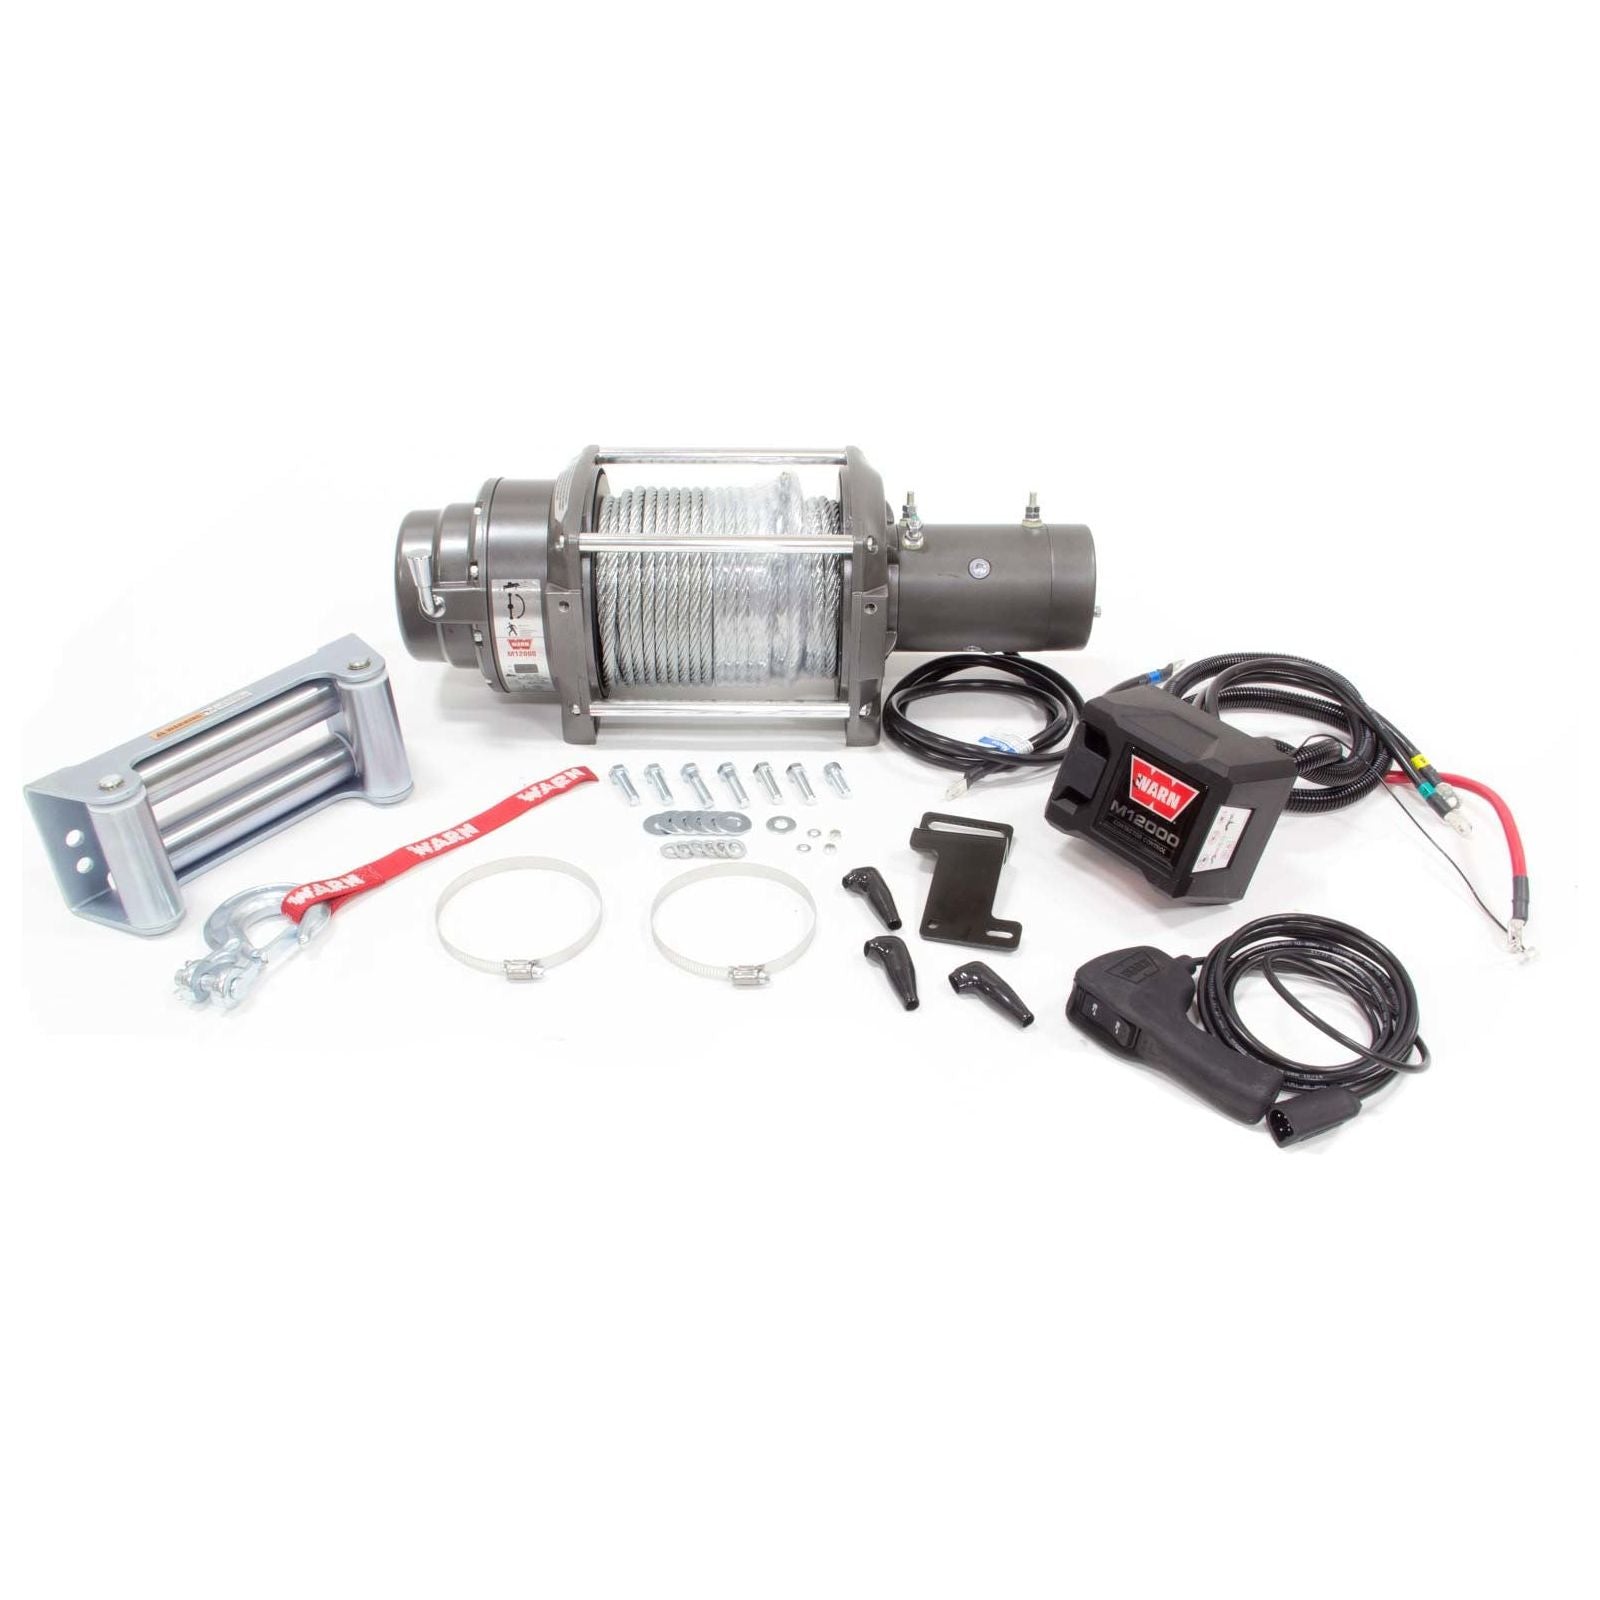 WARN 17801 - M12000 Winch w/Roller & 125' Cable